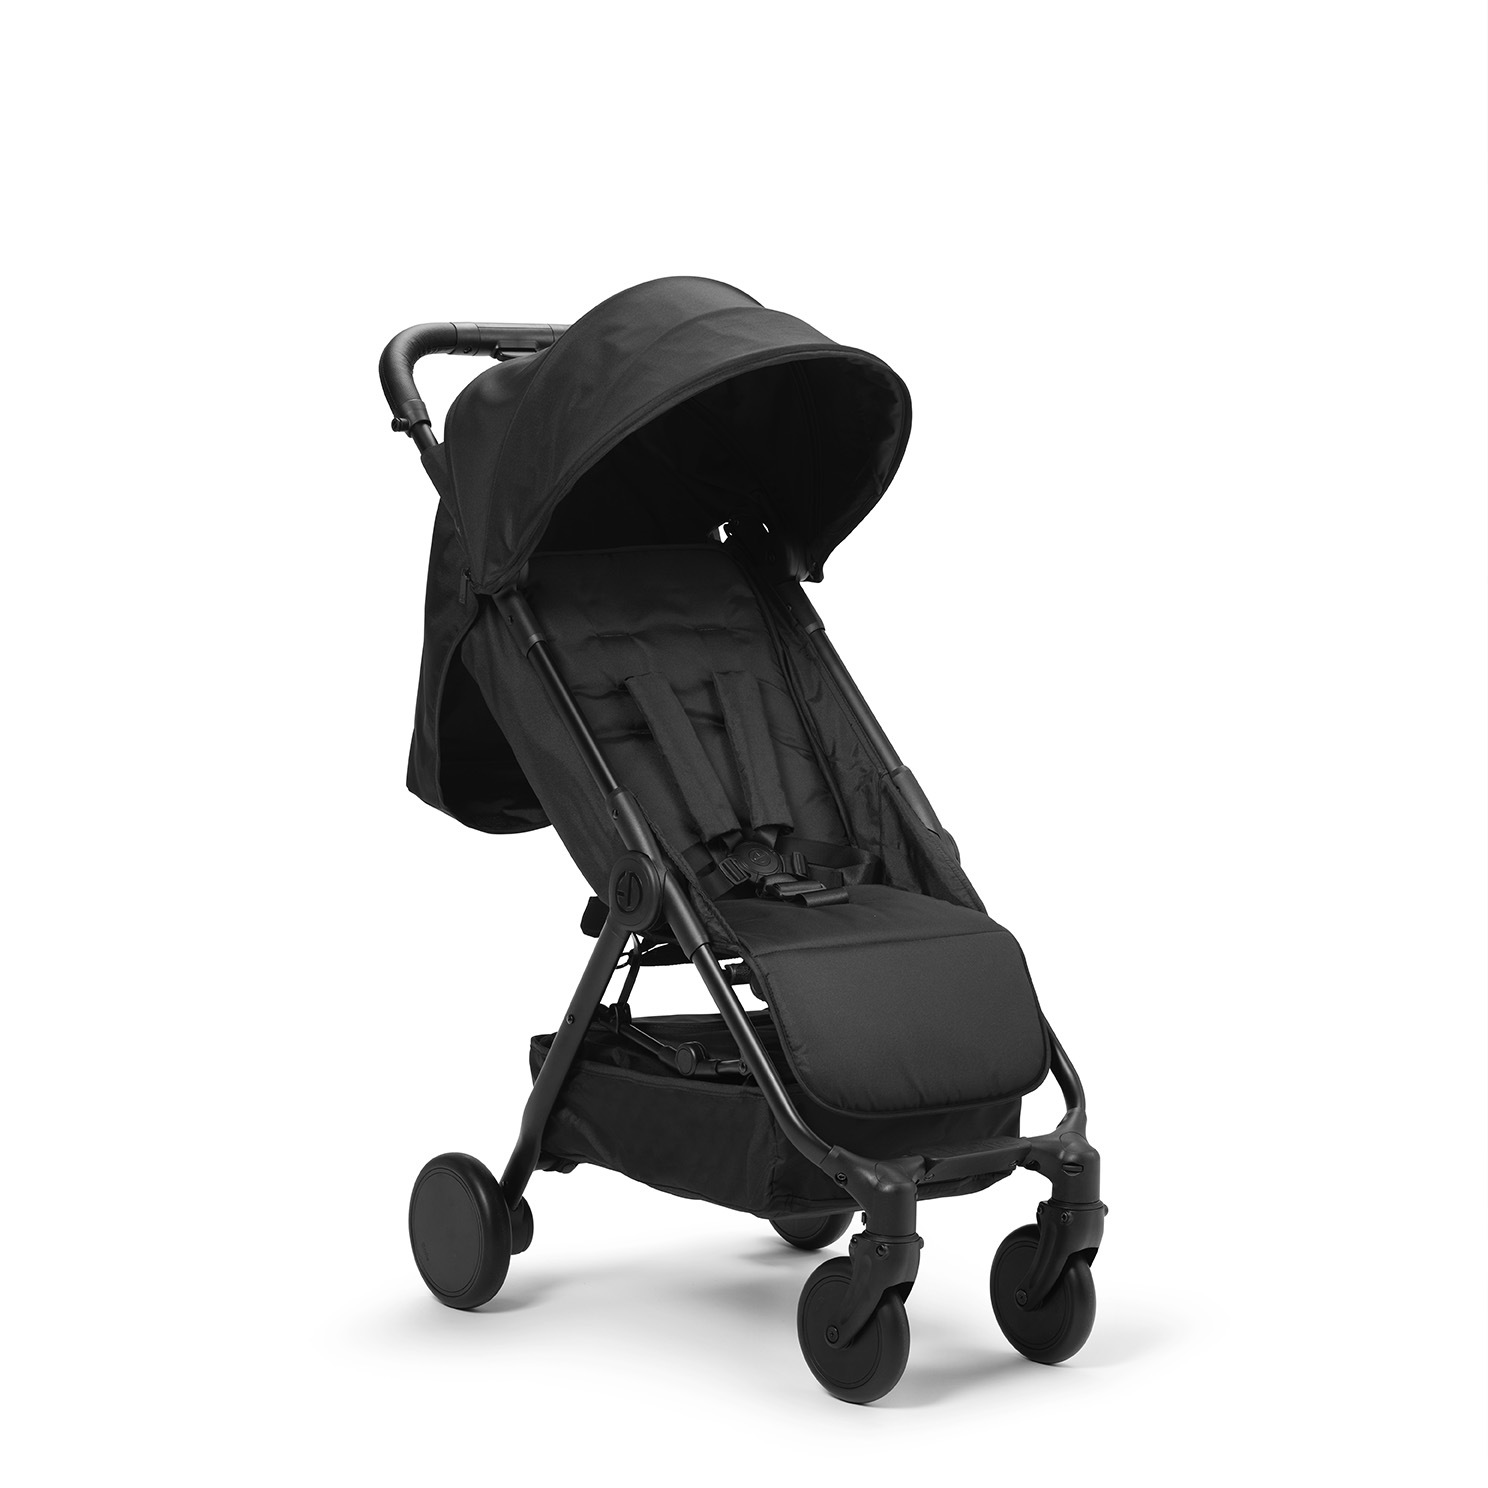 The new Elodie cradle for the Mondo stroller: a combination of safety and comfort